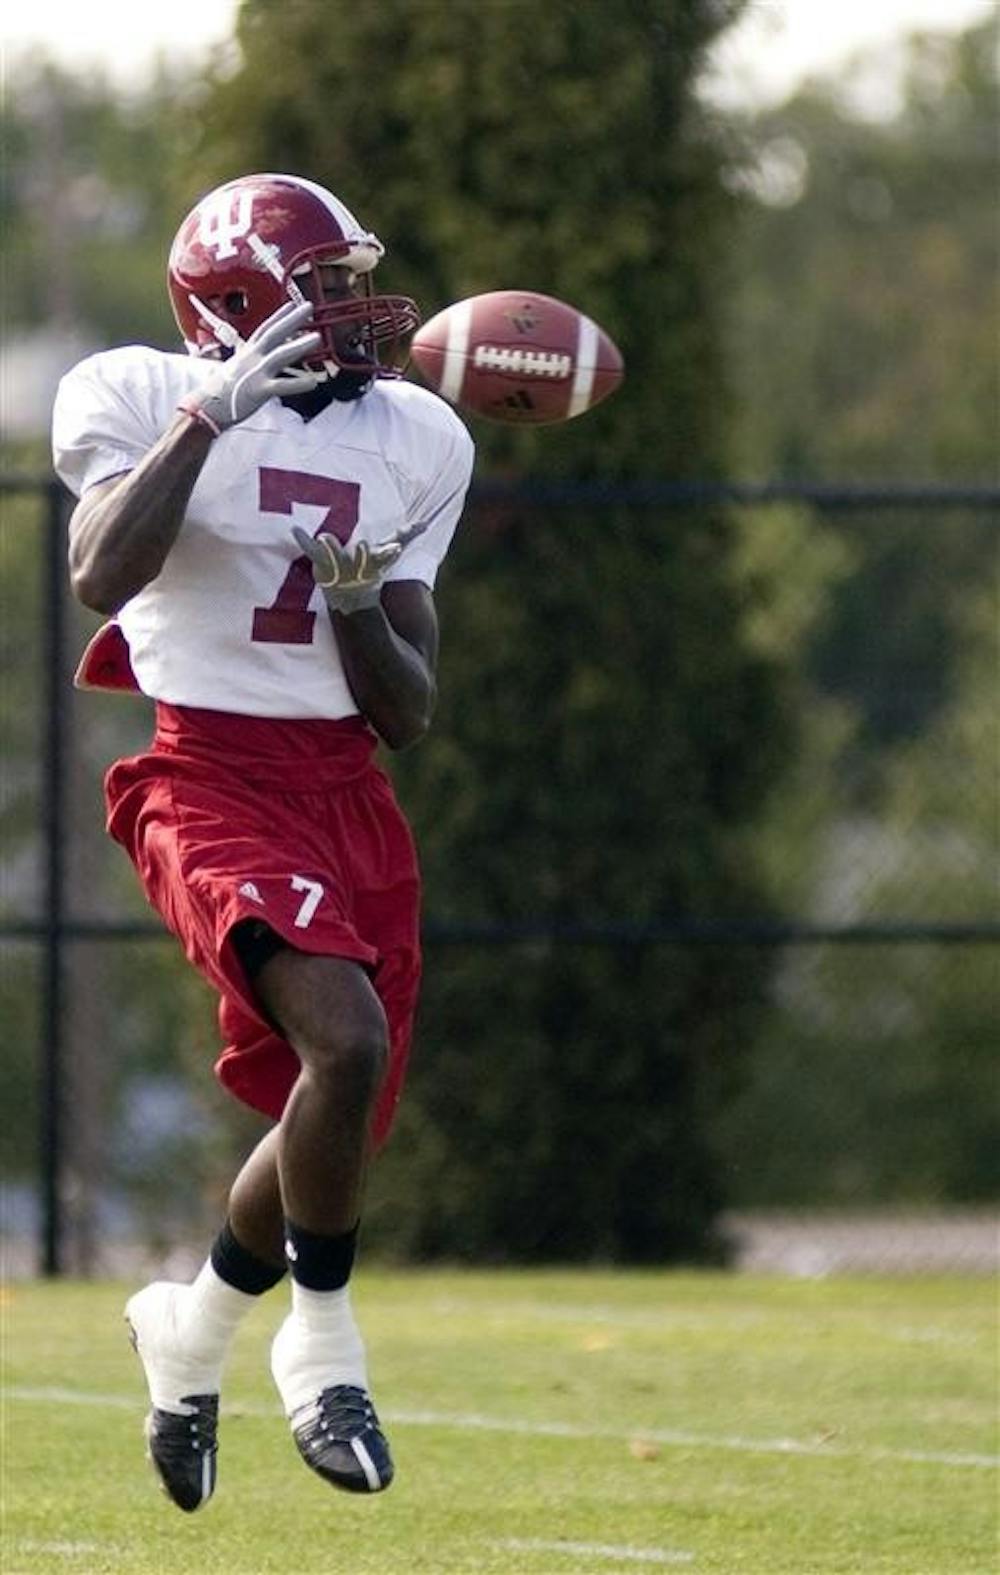 IU wide receiver Ray Fisher makes a catch during a practice on Sept. 8 on the football practice field near the Mellencamp Pavilion.